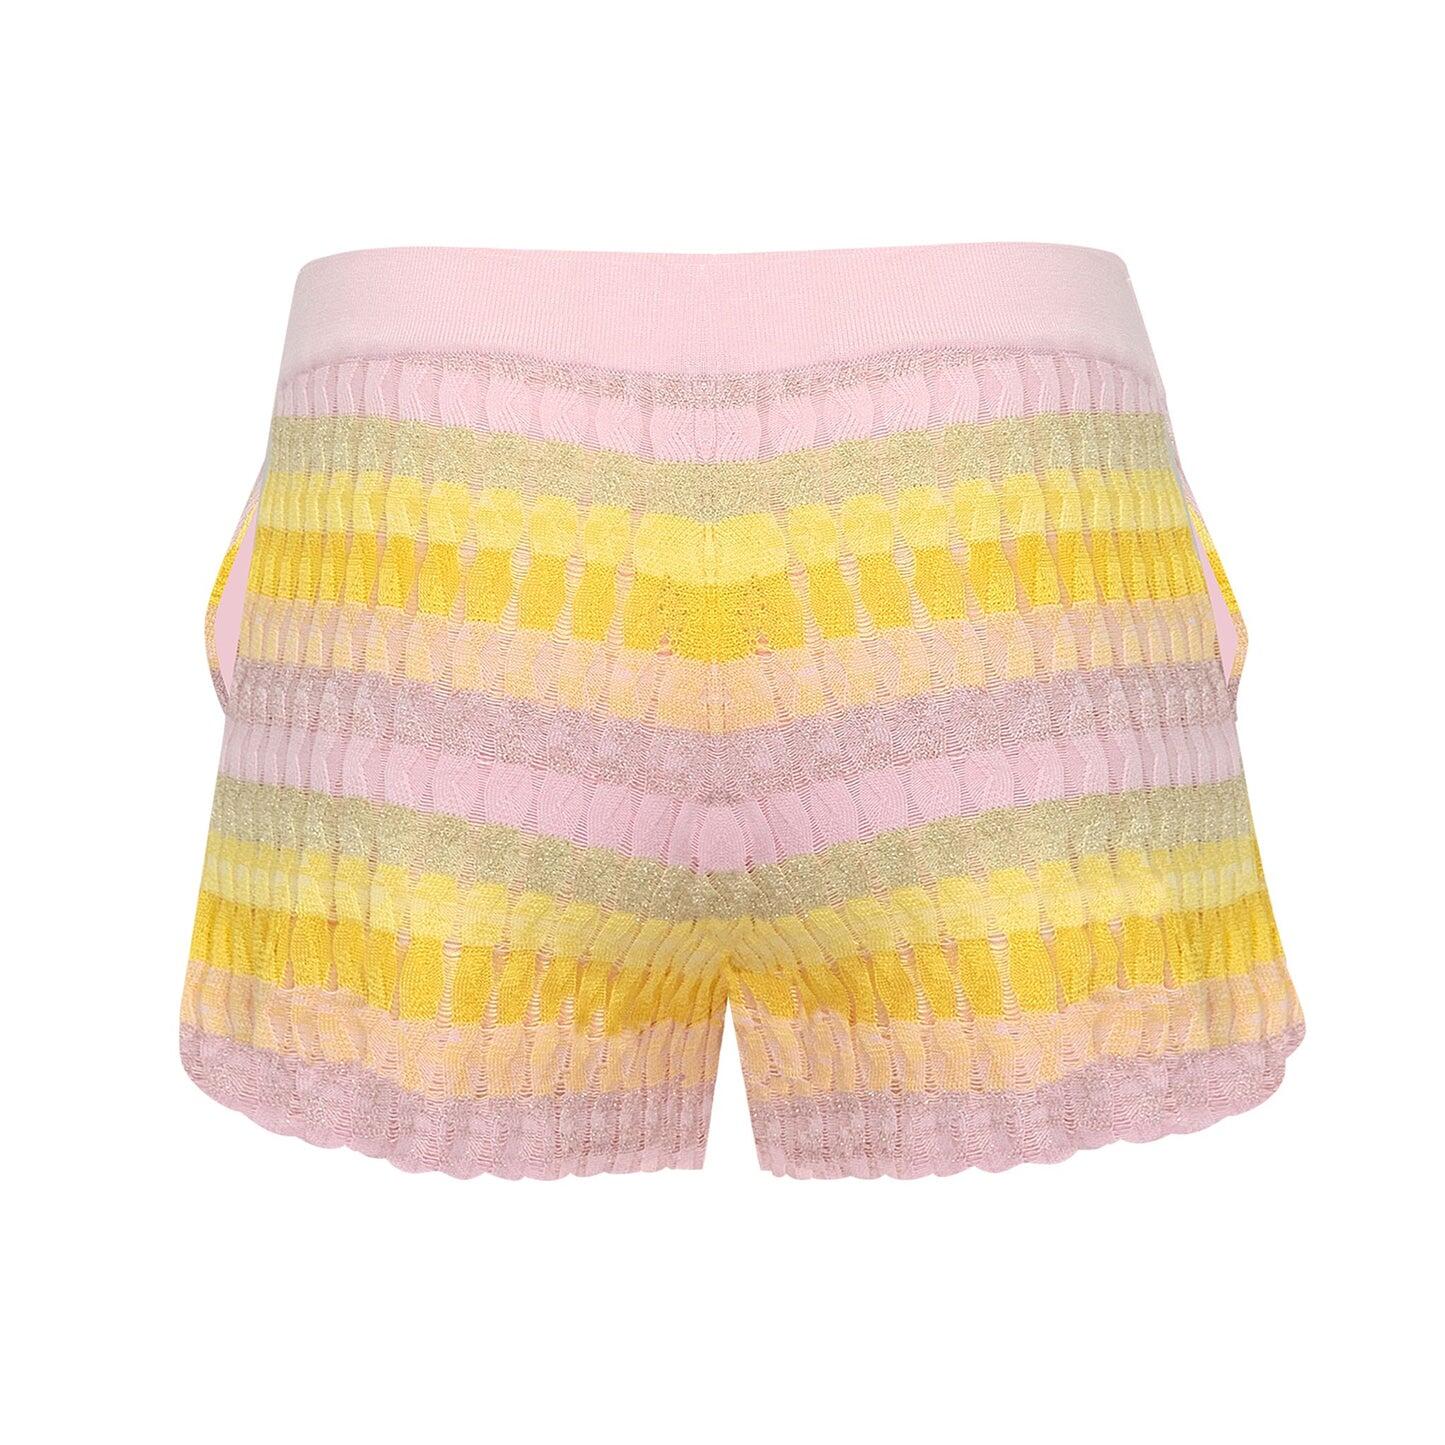 Shorts in Racking Knit Yellow/Pink